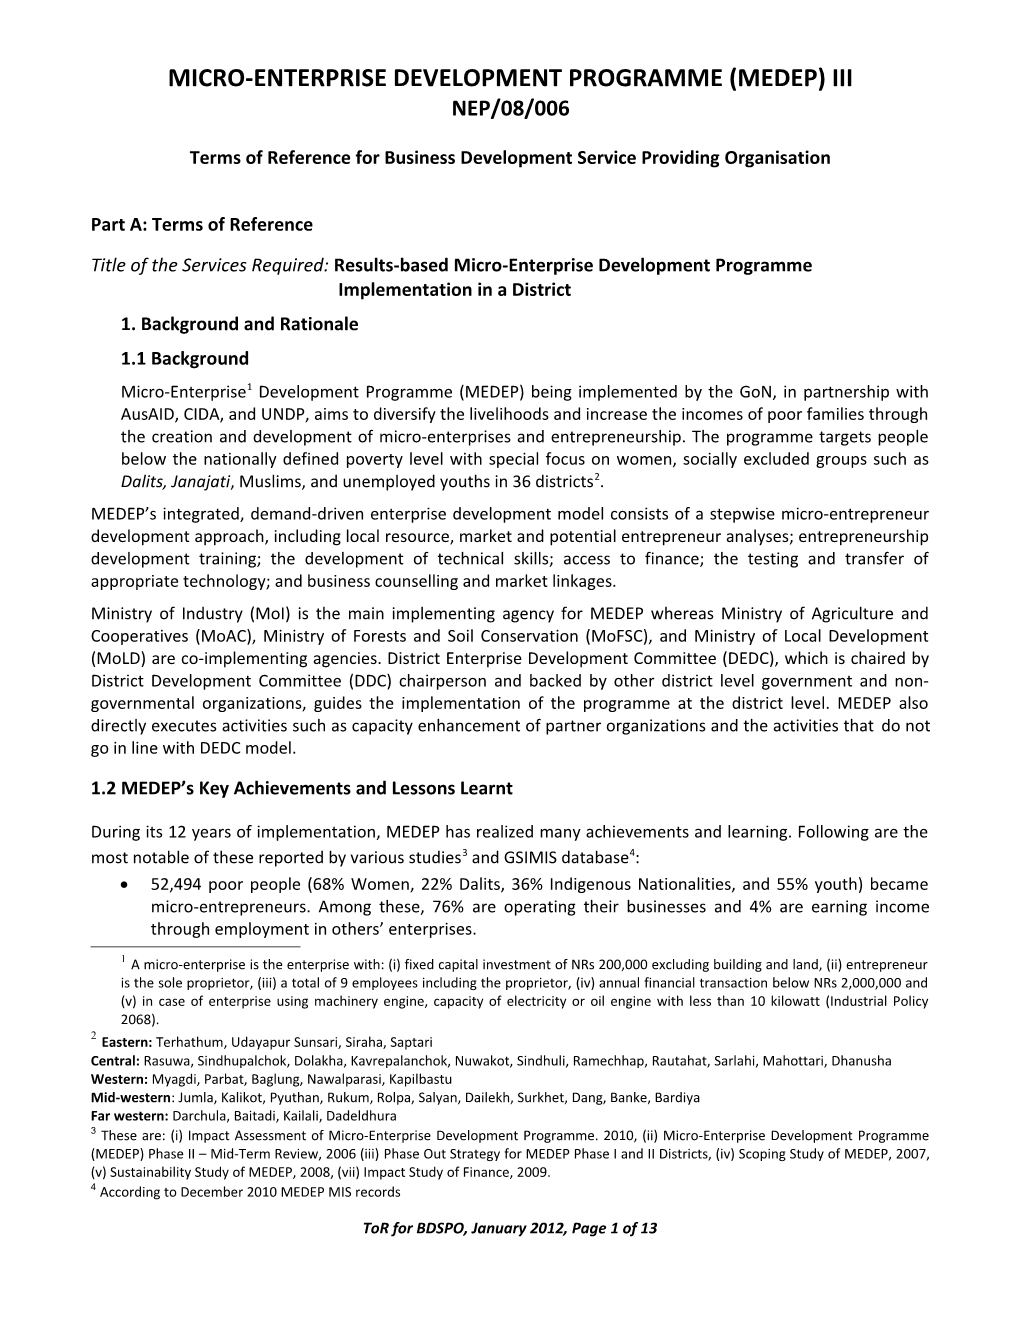 Sub-Contracting Strategies for CIDA-Funded Component of MEDEP